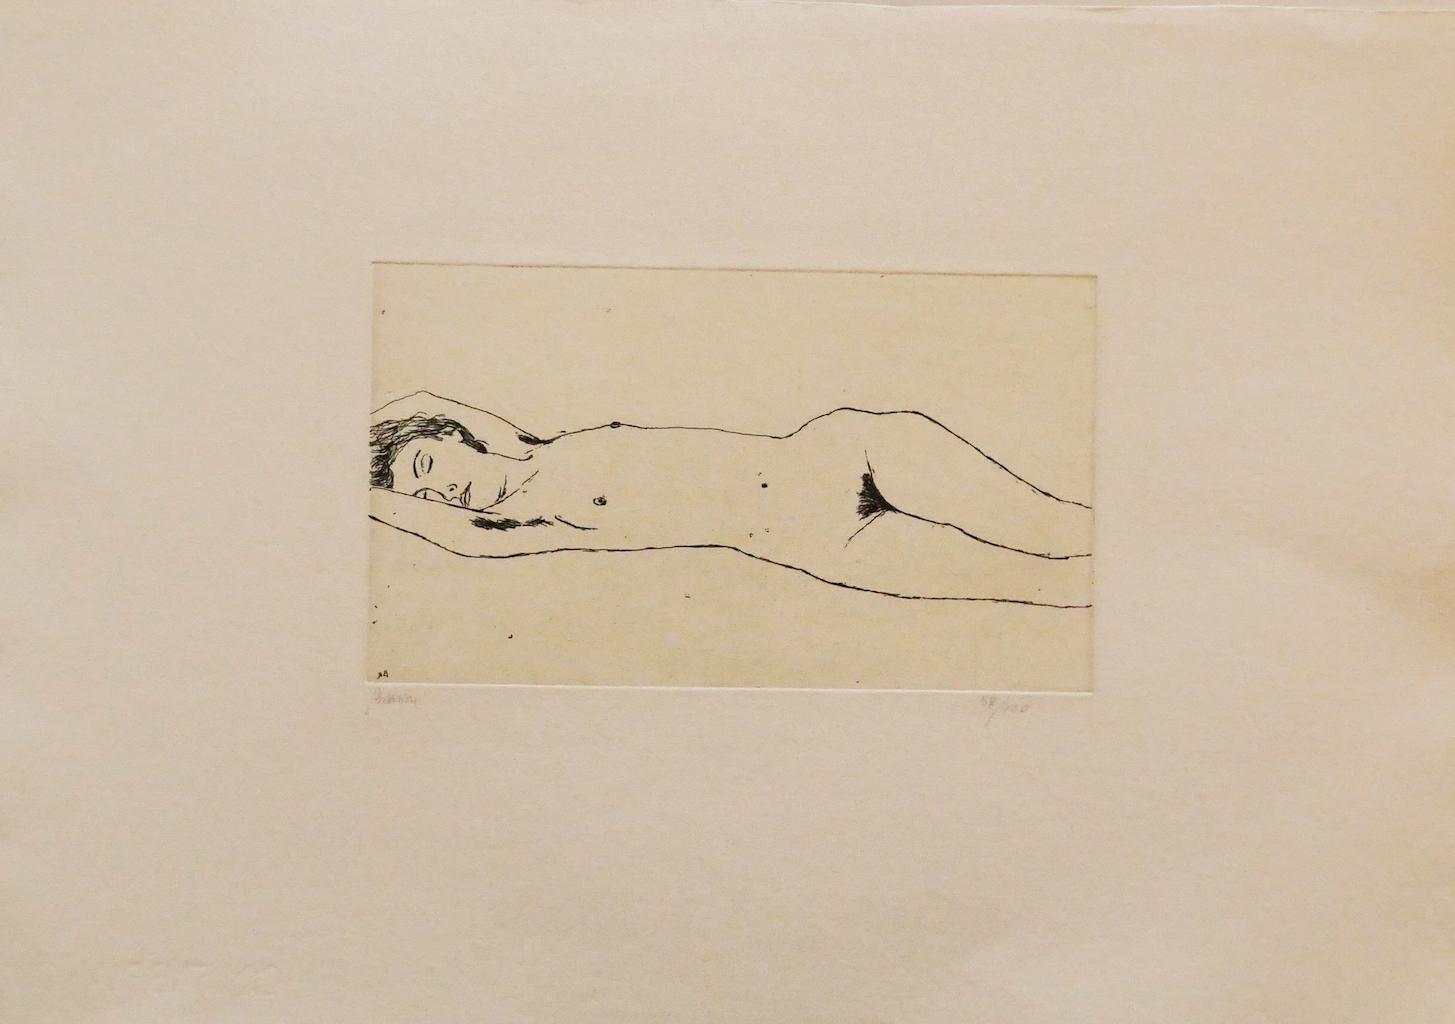 Nude is an original etching on paper realized in 1972 by Renzo Biasion.

Hand-signed on the lower left in pencil. Numbered, edition of 58/100 prints.

In very good conditions.

The artwork represents a lying down nude through confident and strong